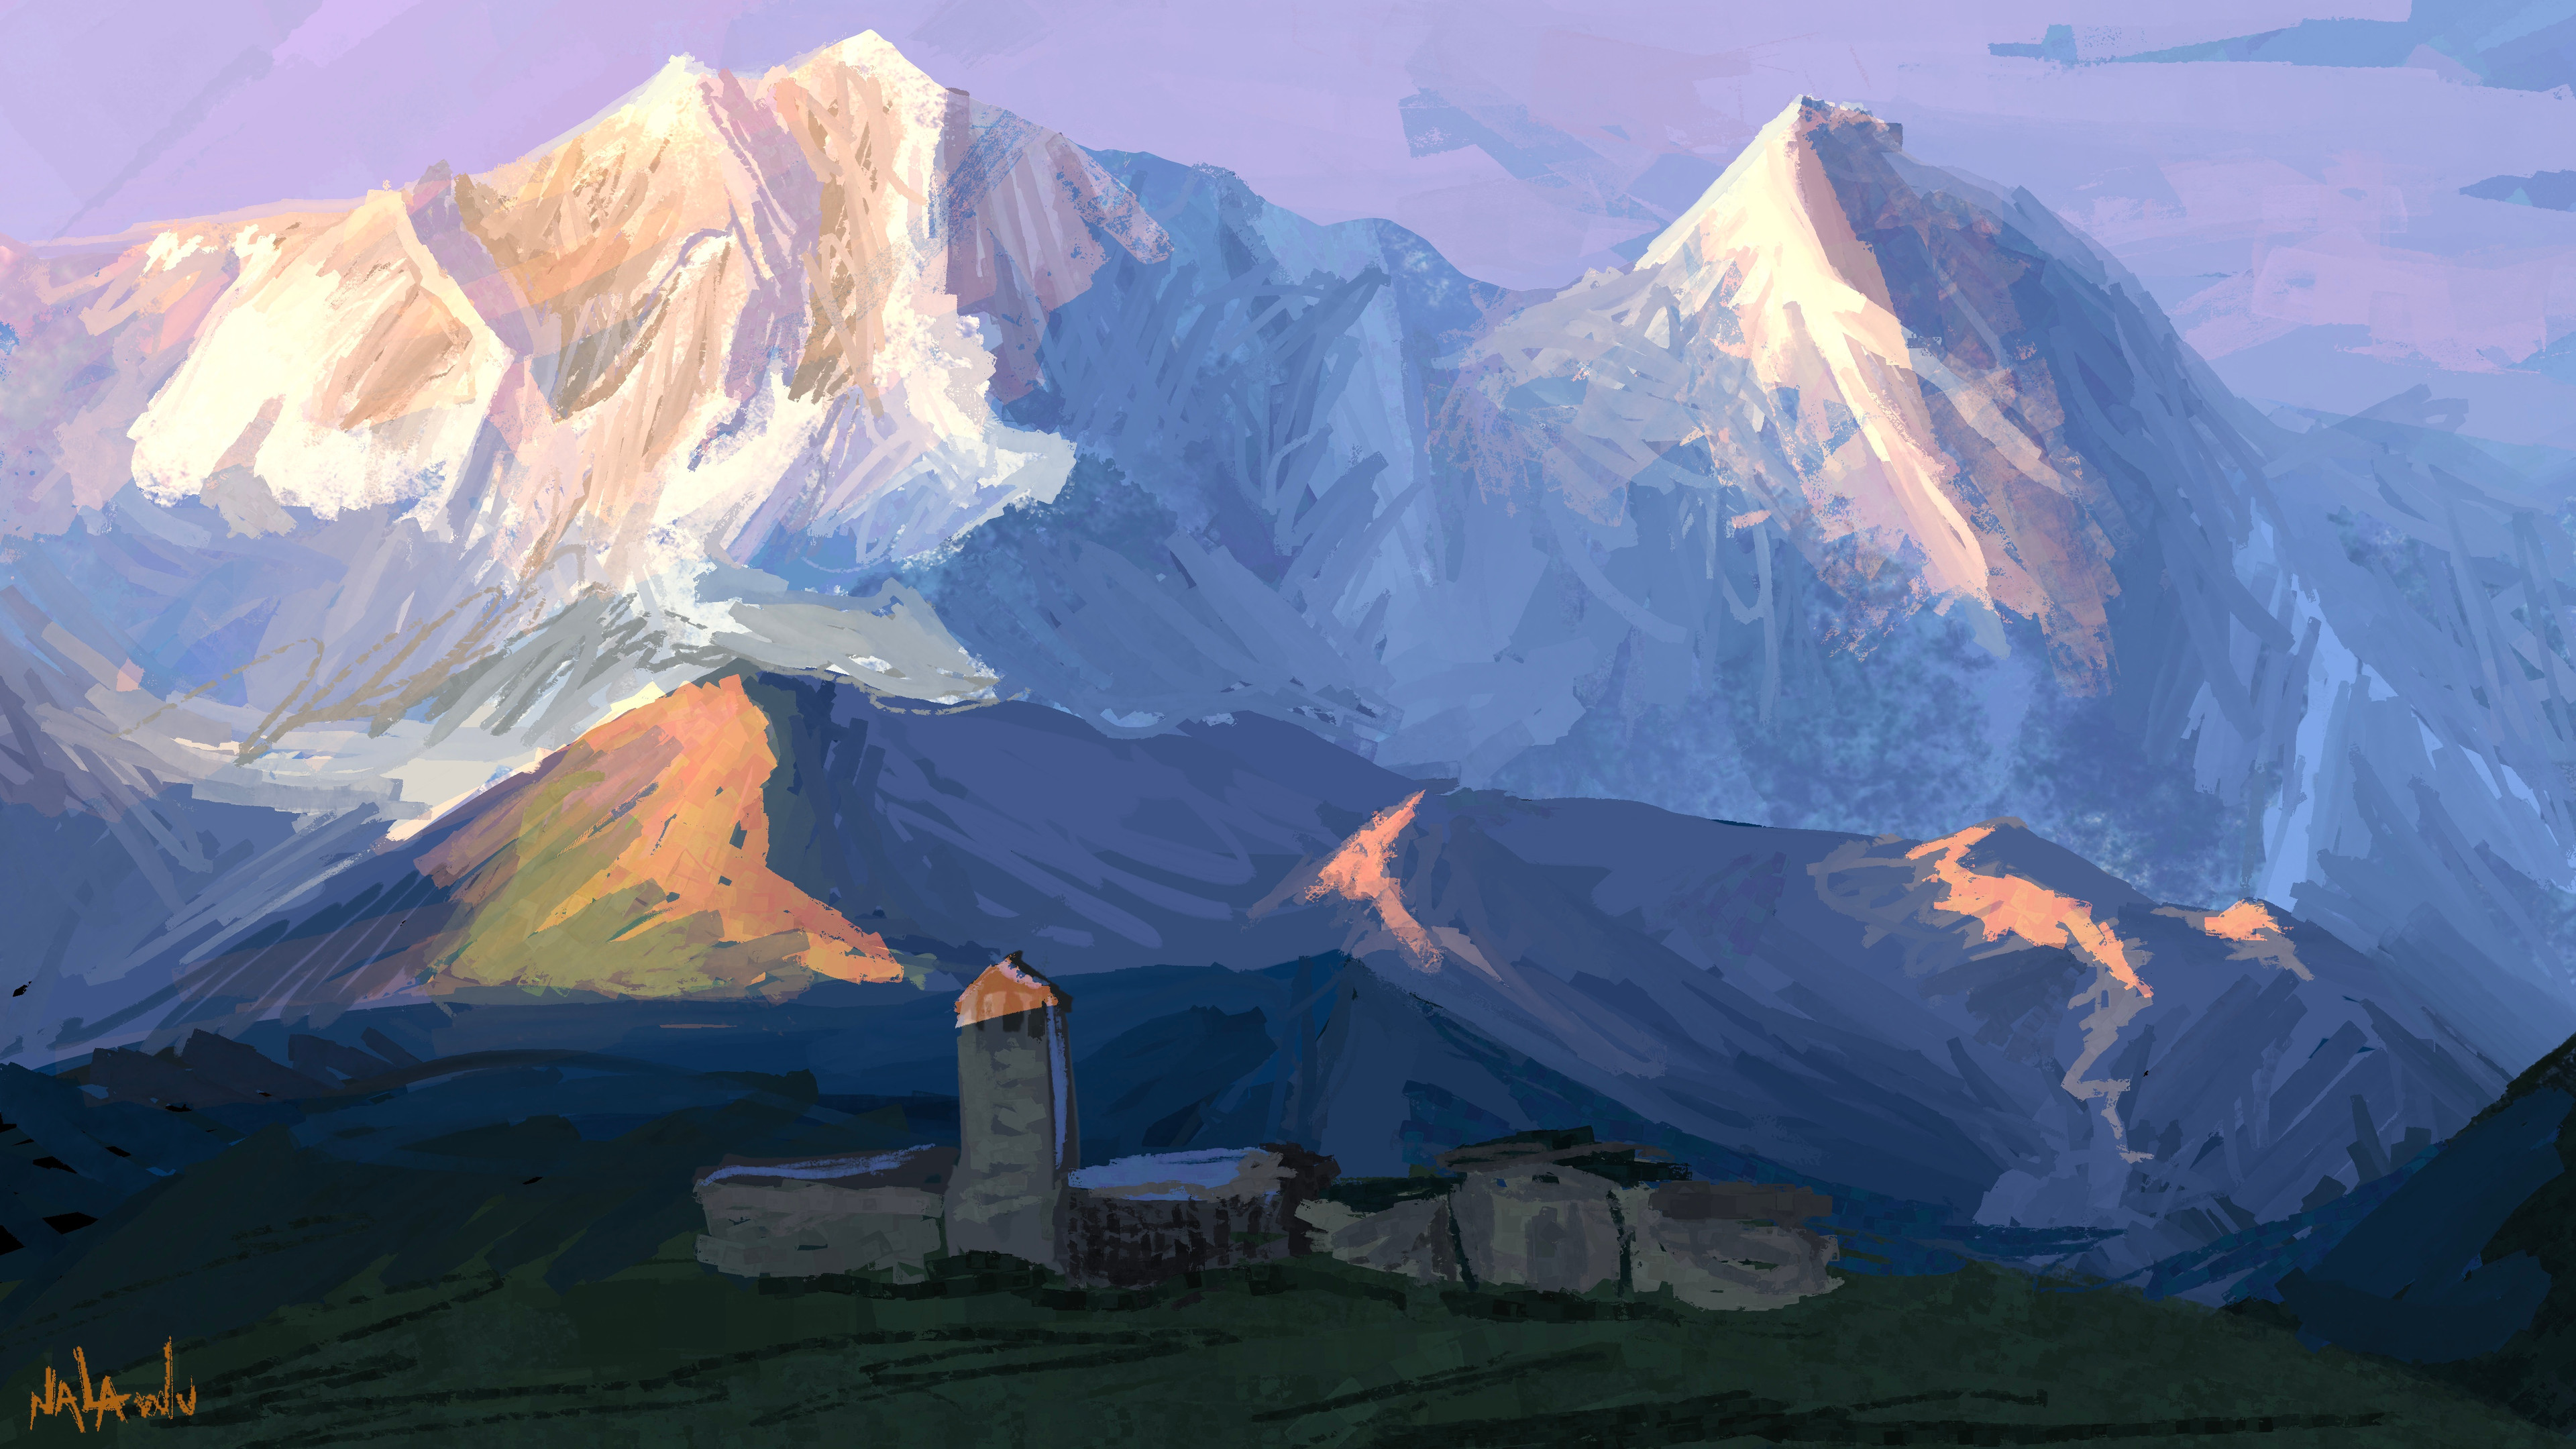 45 minute speedpaint of a Tower House in Svaneti. I painted this entirely with Kyle T Webster's India brushes to help promote them online! They were on sale until May 10th, 2021. All proceeds went to benefit COVID relief in India!